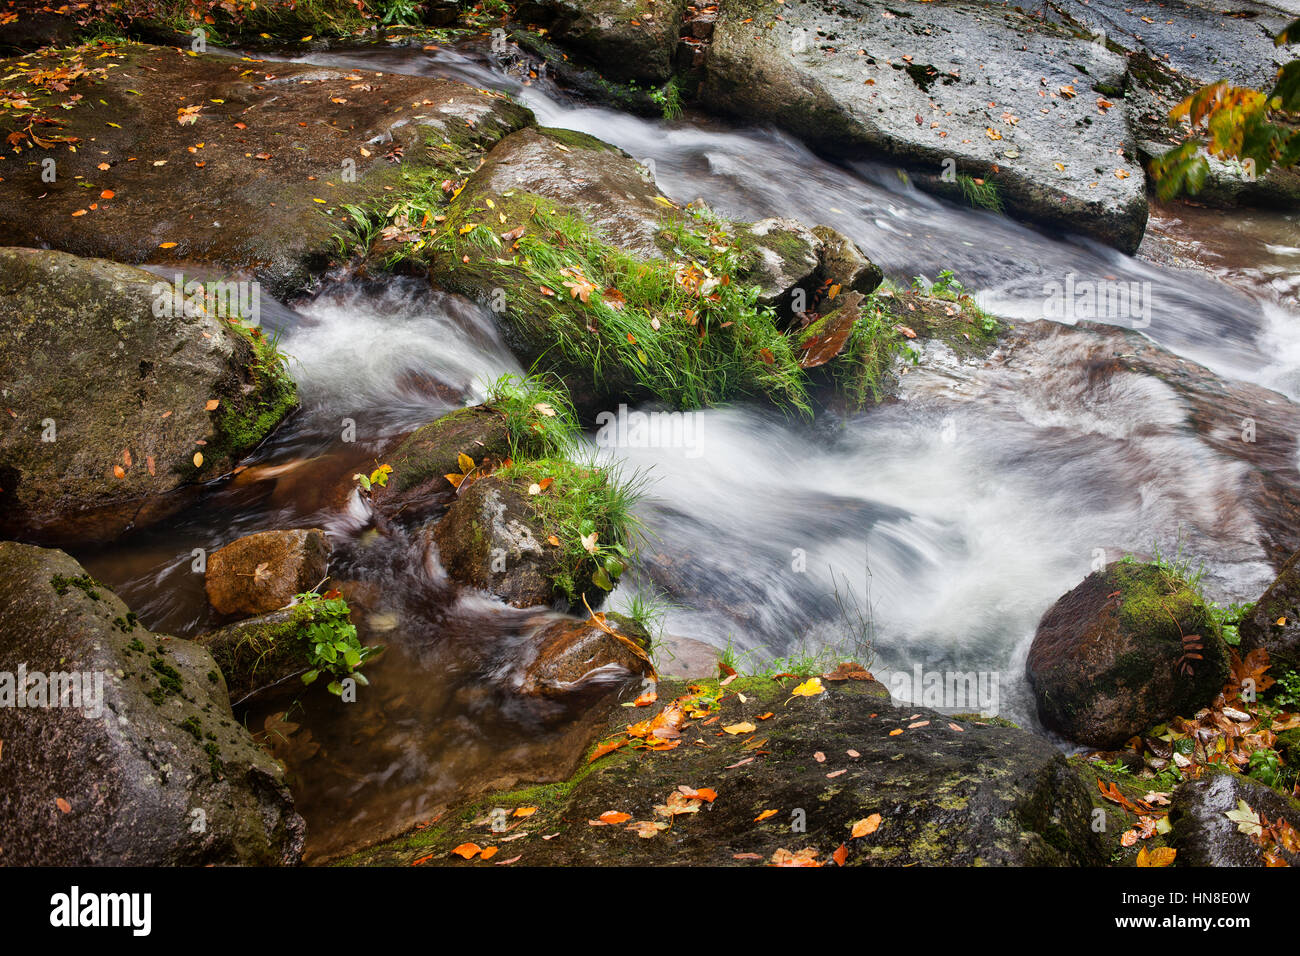 Closeup on small rocky creek in autumn with bits of grass and fallen leaves Stock Photo